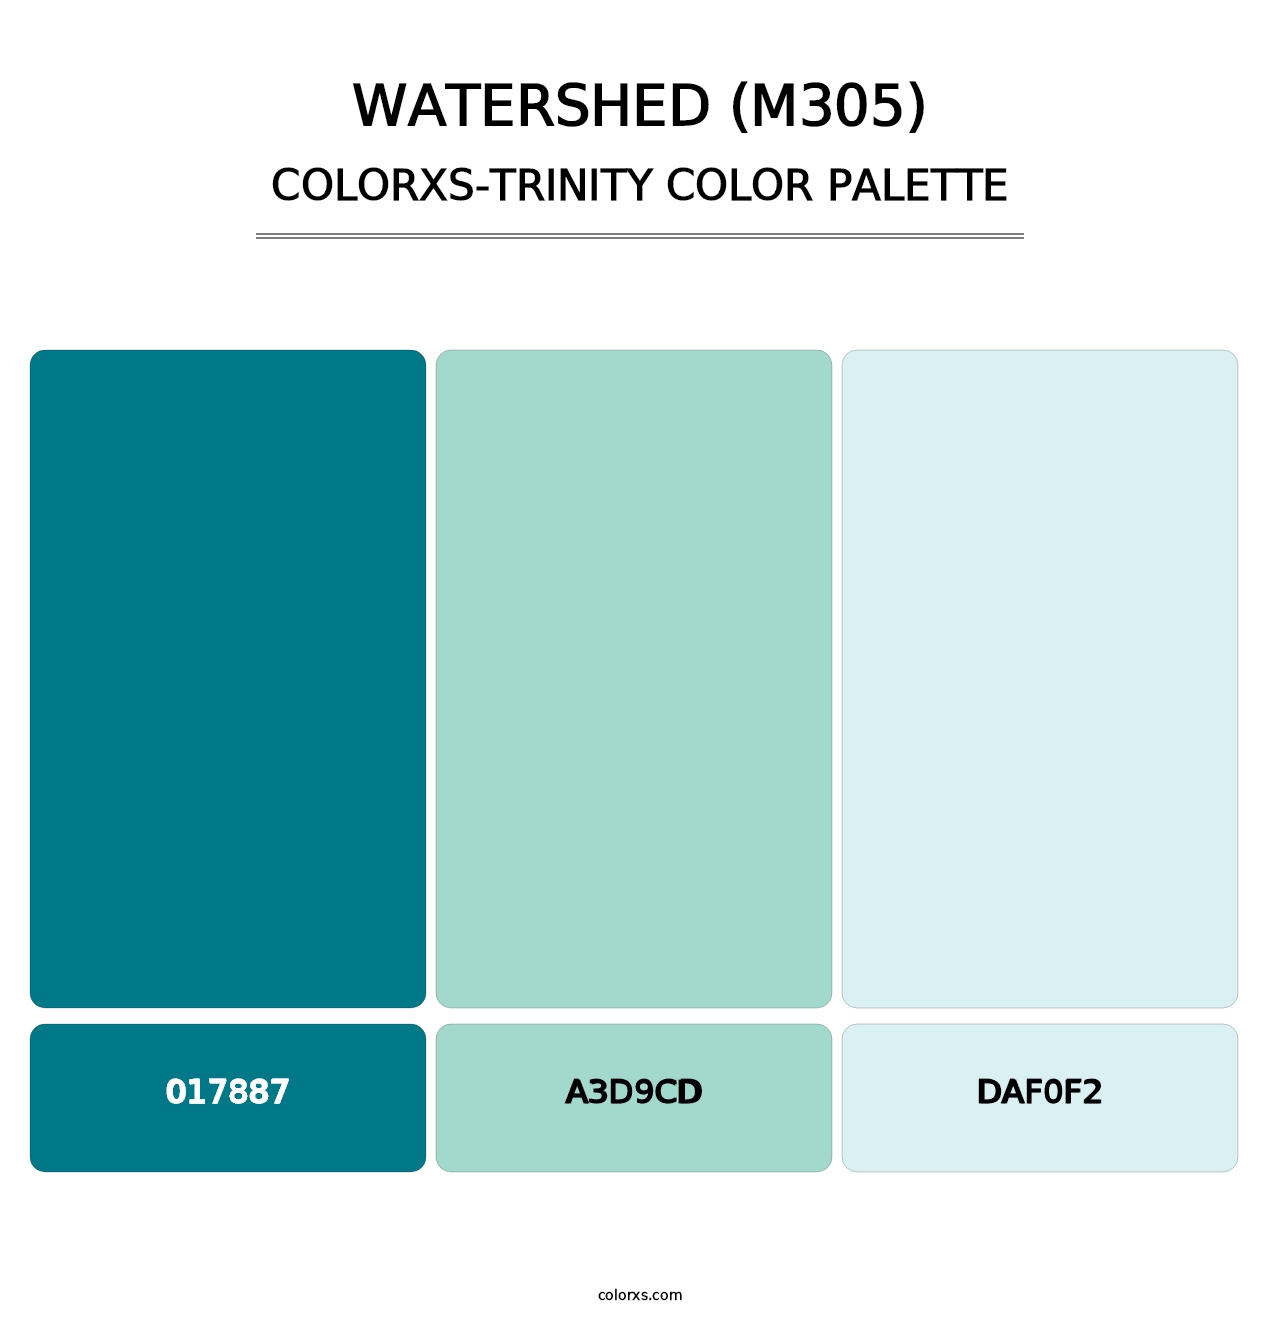 Watershed (M305) - Colorxs Trinity Palette